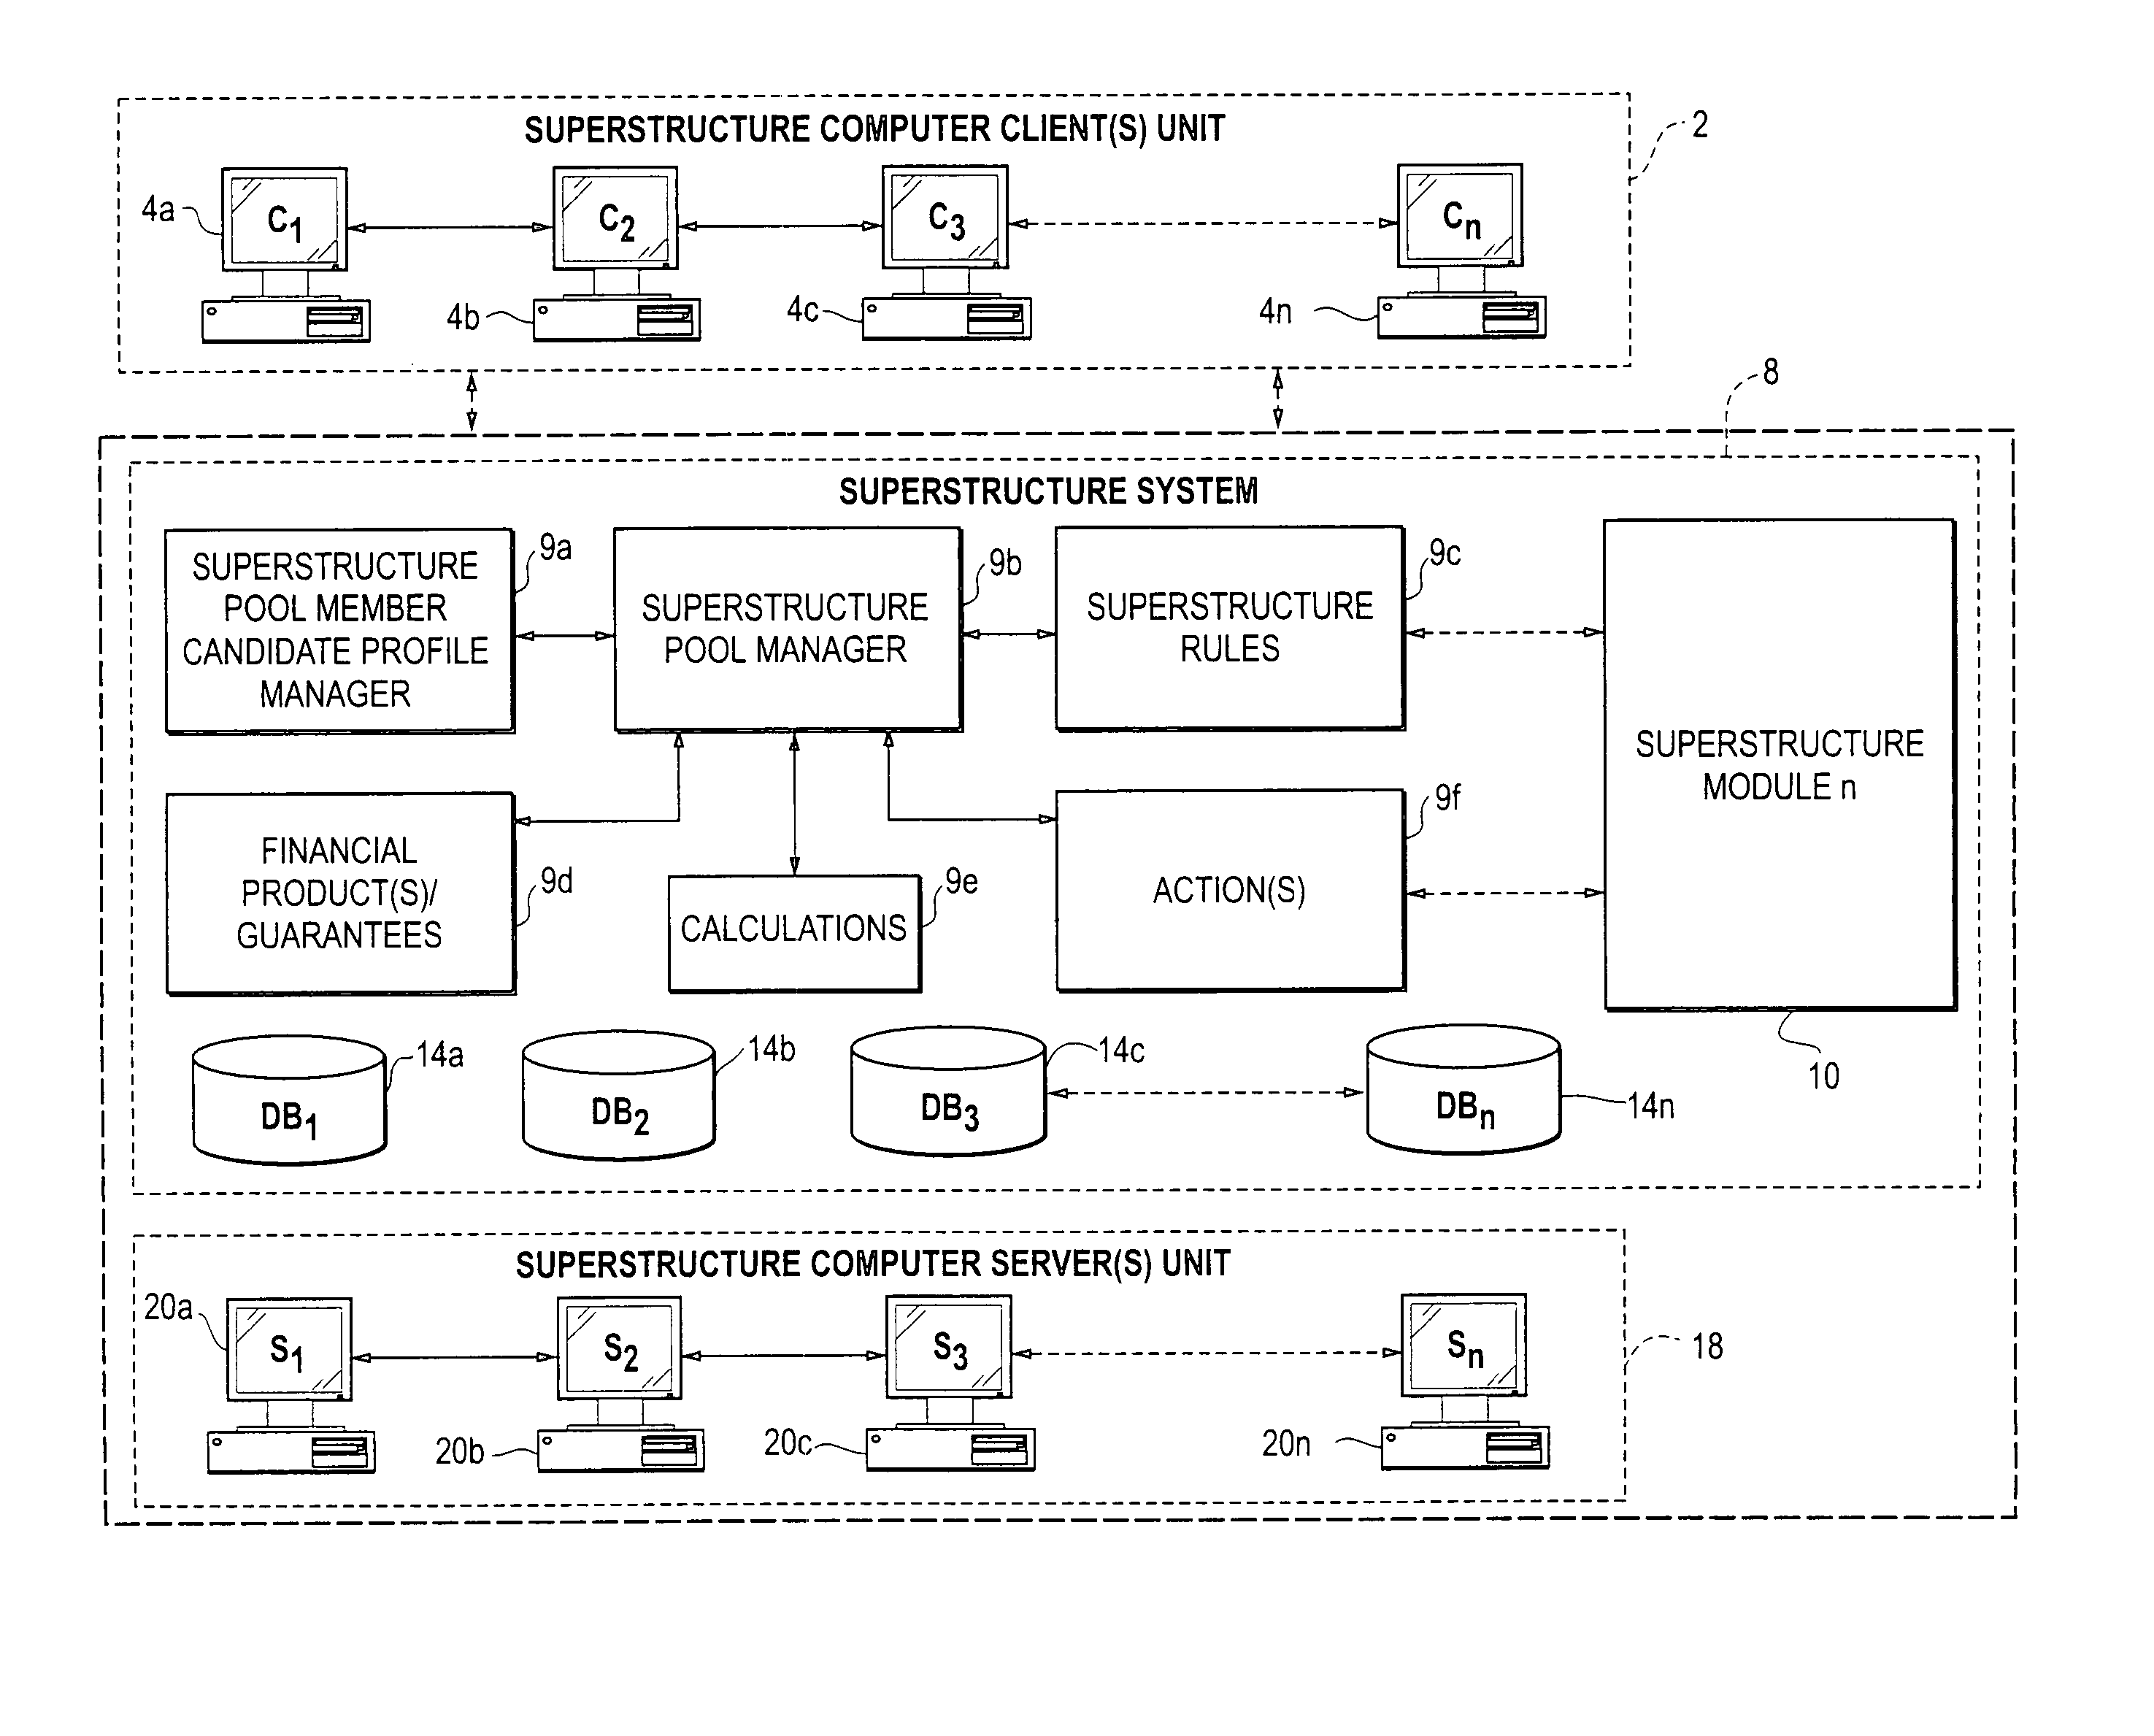 Superstructure pool computer system